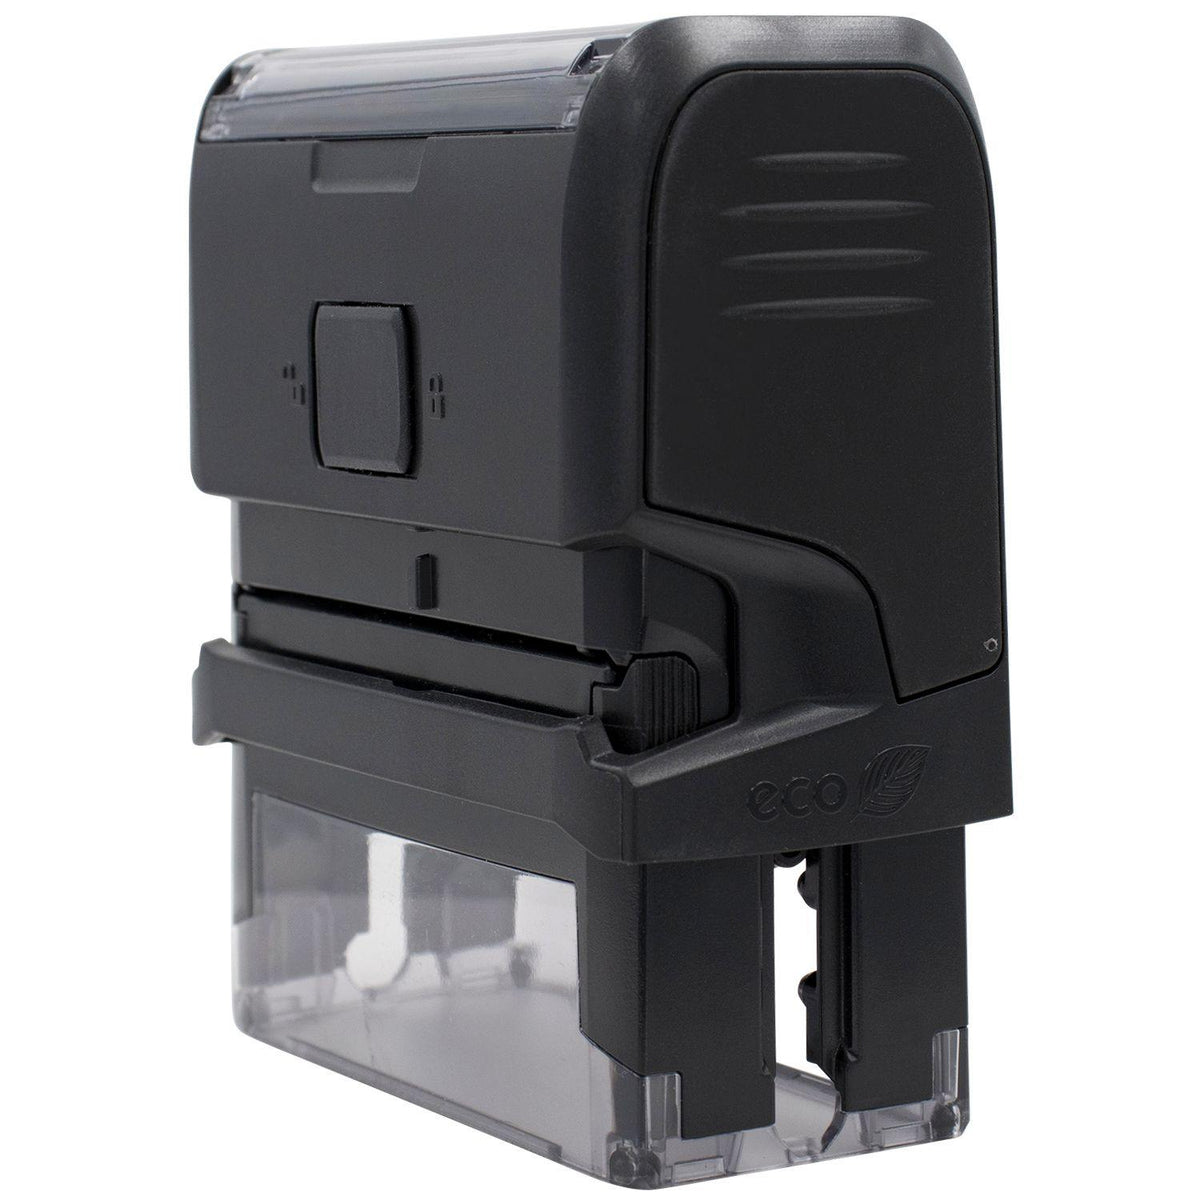 Self Inking Debtor Exhibit Stamp - Engineer Seal Stamps - Brand_Trodat, Impression Size_Small, Stamp Type_Self-Inking Stamp, Type of Use_Legal